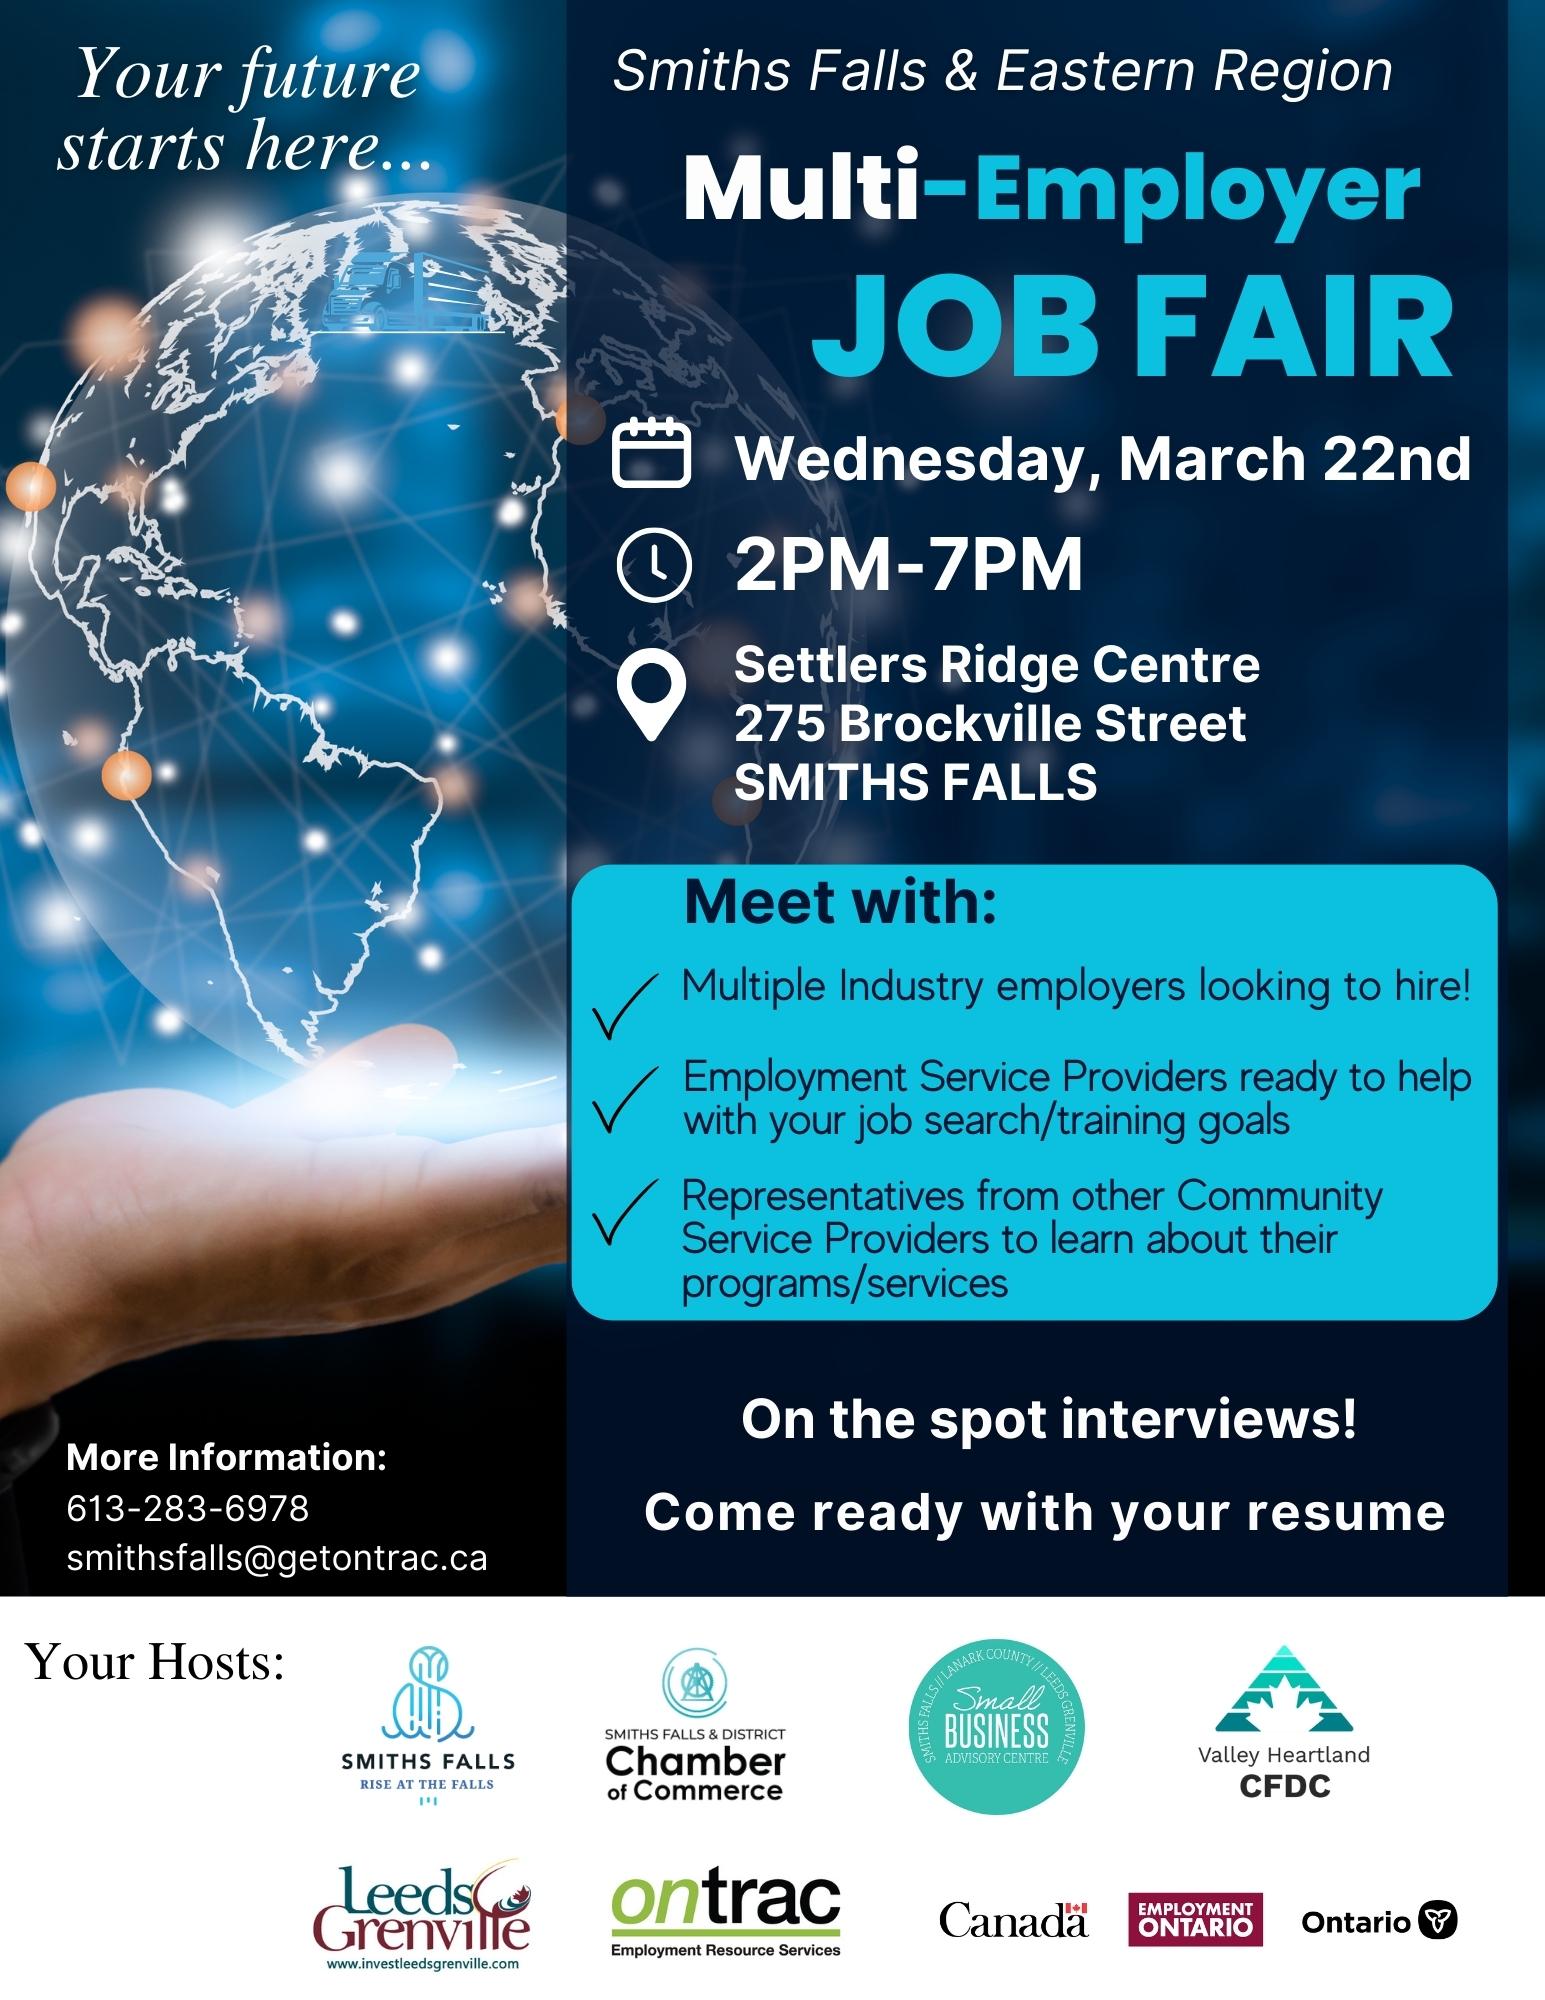 job fare poster with details of the event